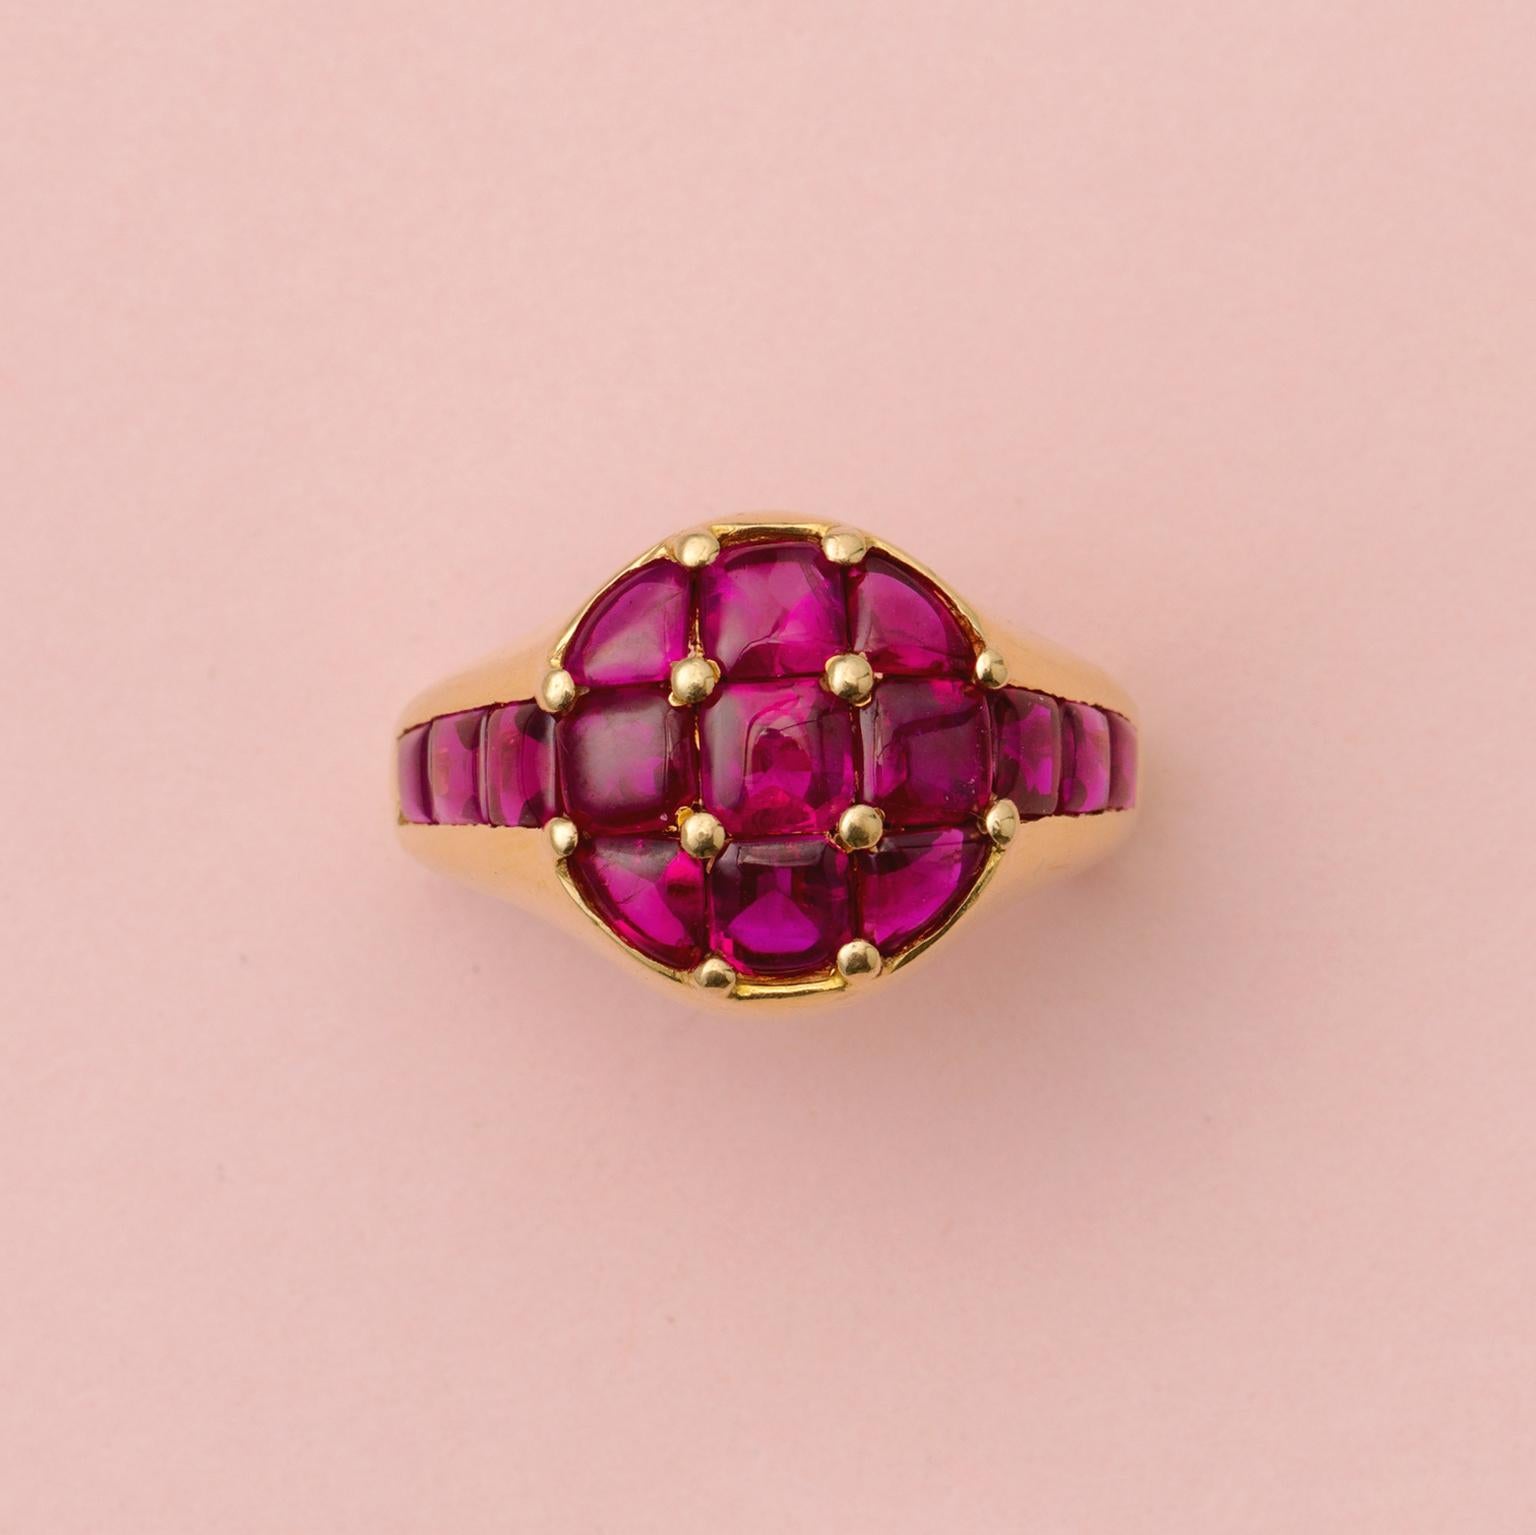 An 18 carat gold ring with a circle of (natural heated Birma) rubies, signed: Faraone, Italy.

ring size: 17.25+ mm / 7 US
weight: 9.42 grams
dimensions circle: 12 x 13 mm
width shank: 4 – 13 mm
dimensions: van 3.0 x 2.6 x 1.9 mm tot 4.2 x 4.1 x 2.4